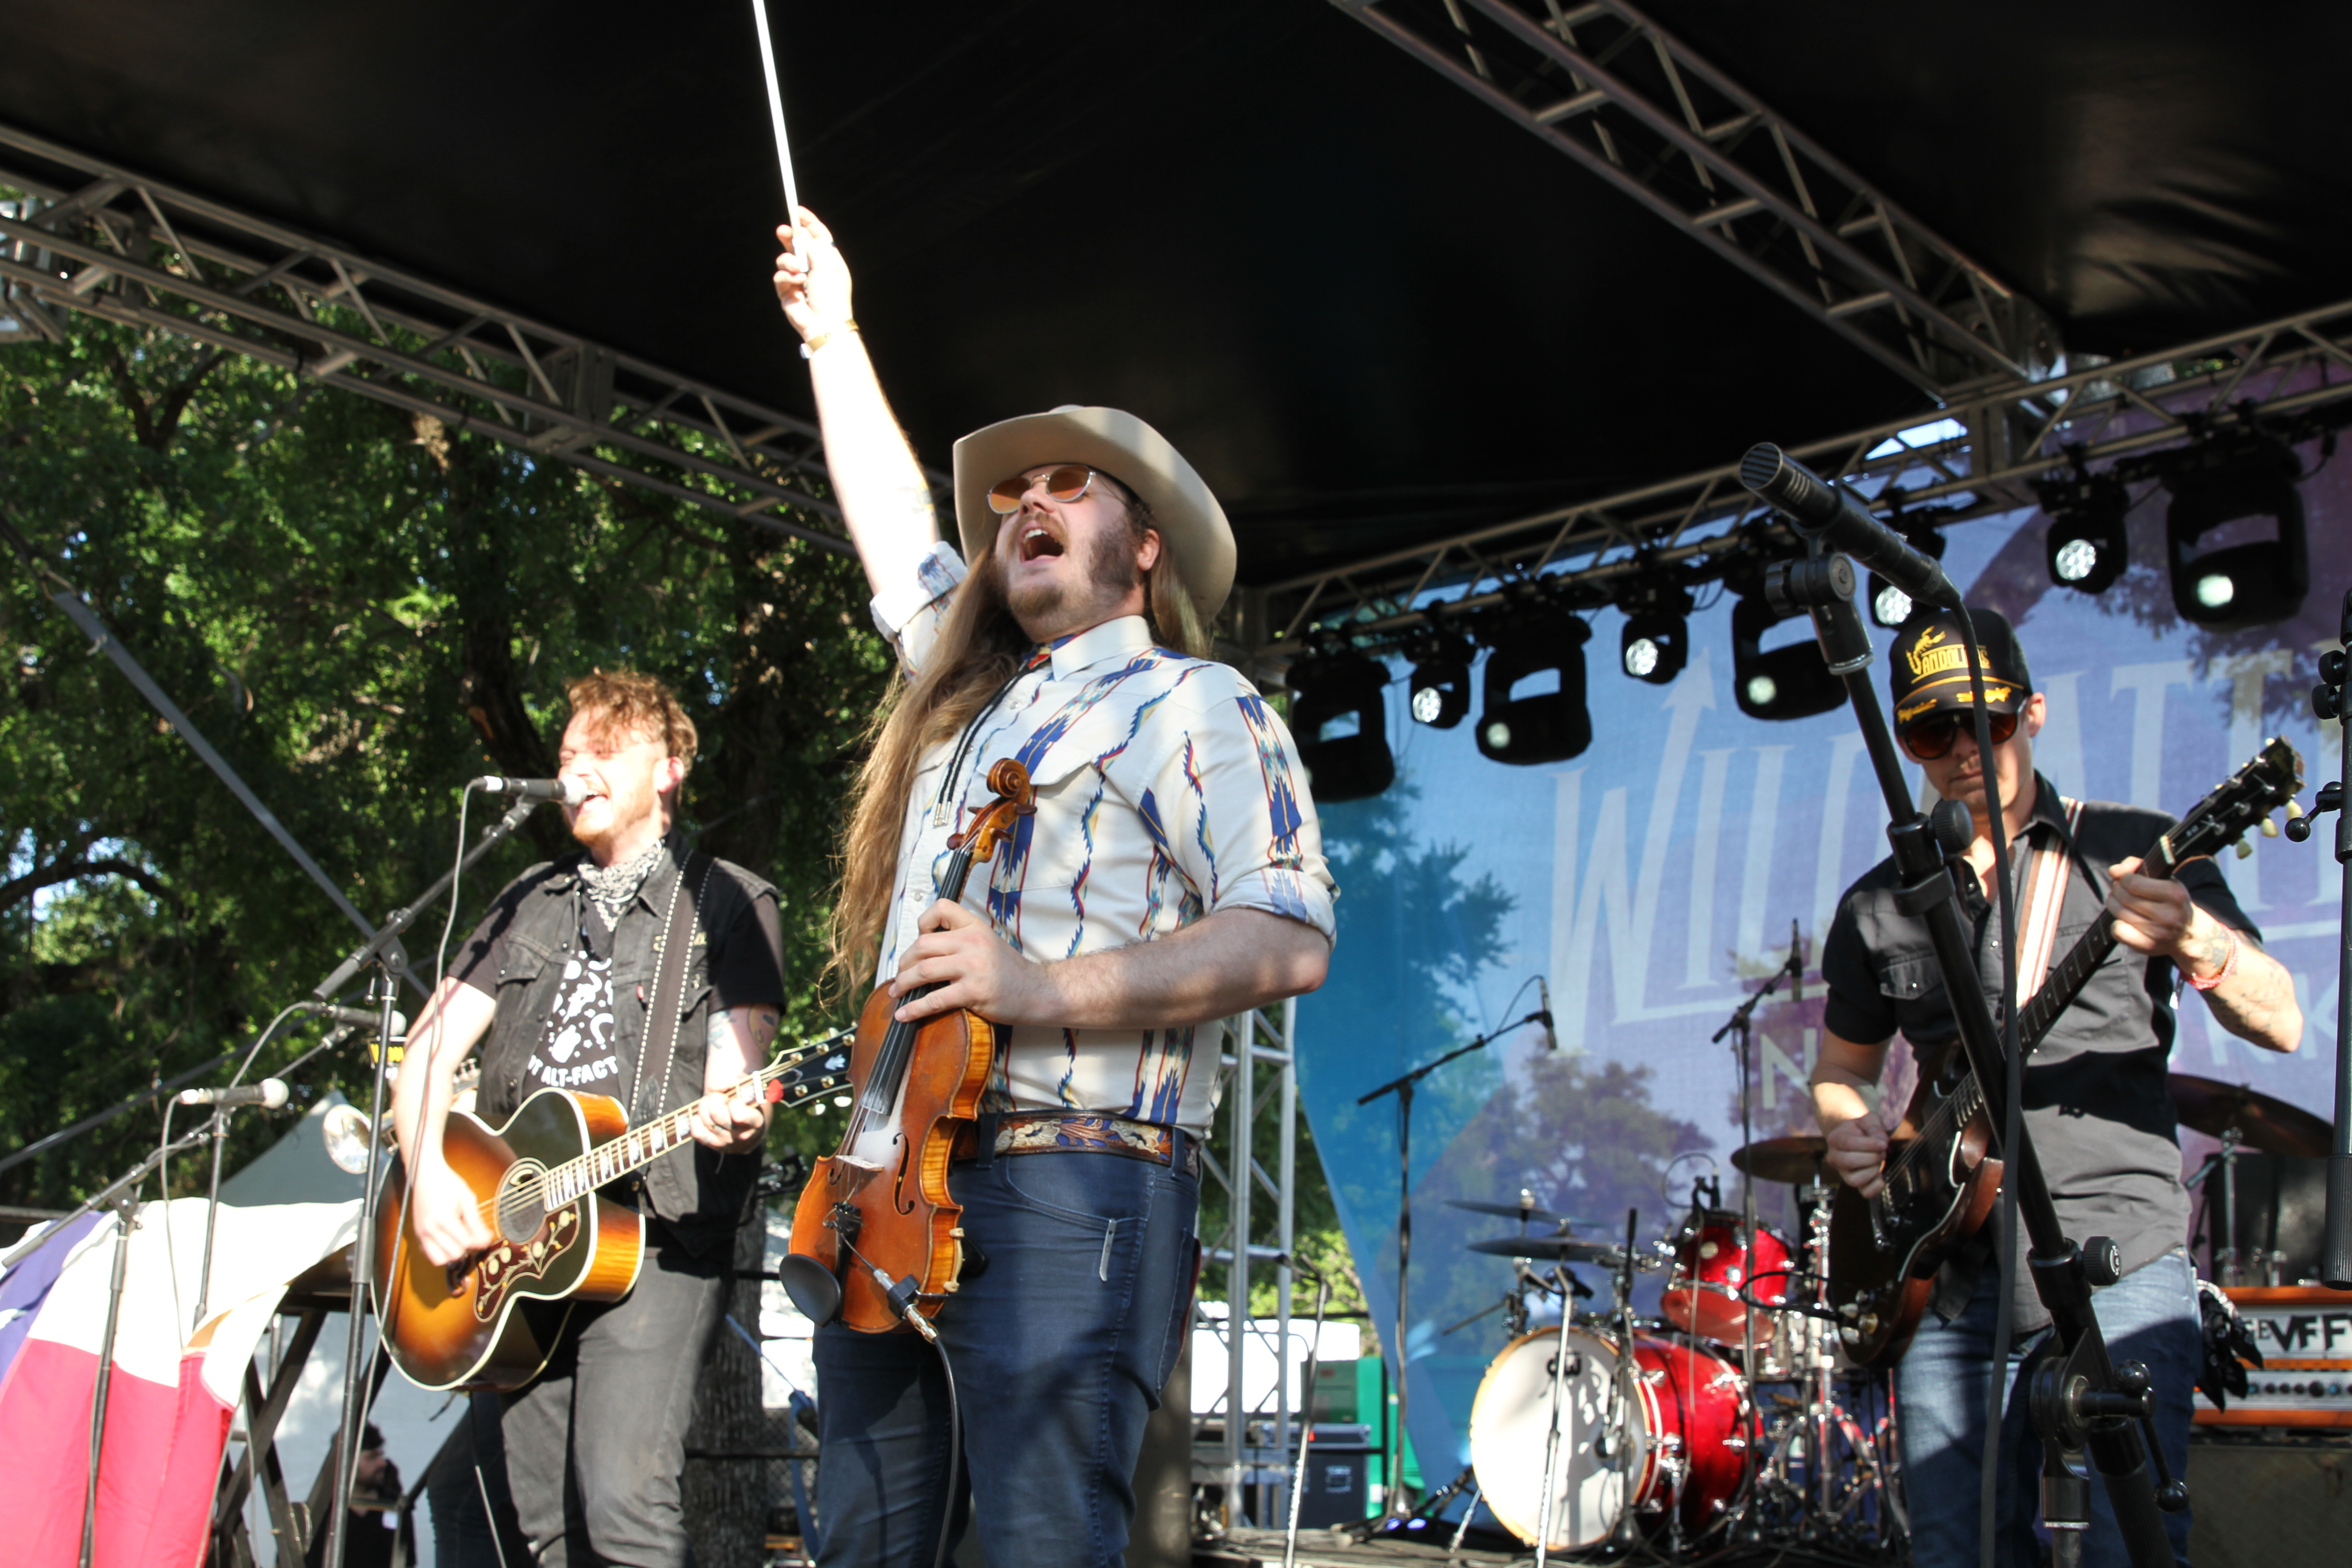 The Vandoliers at Fortress Festival 2018